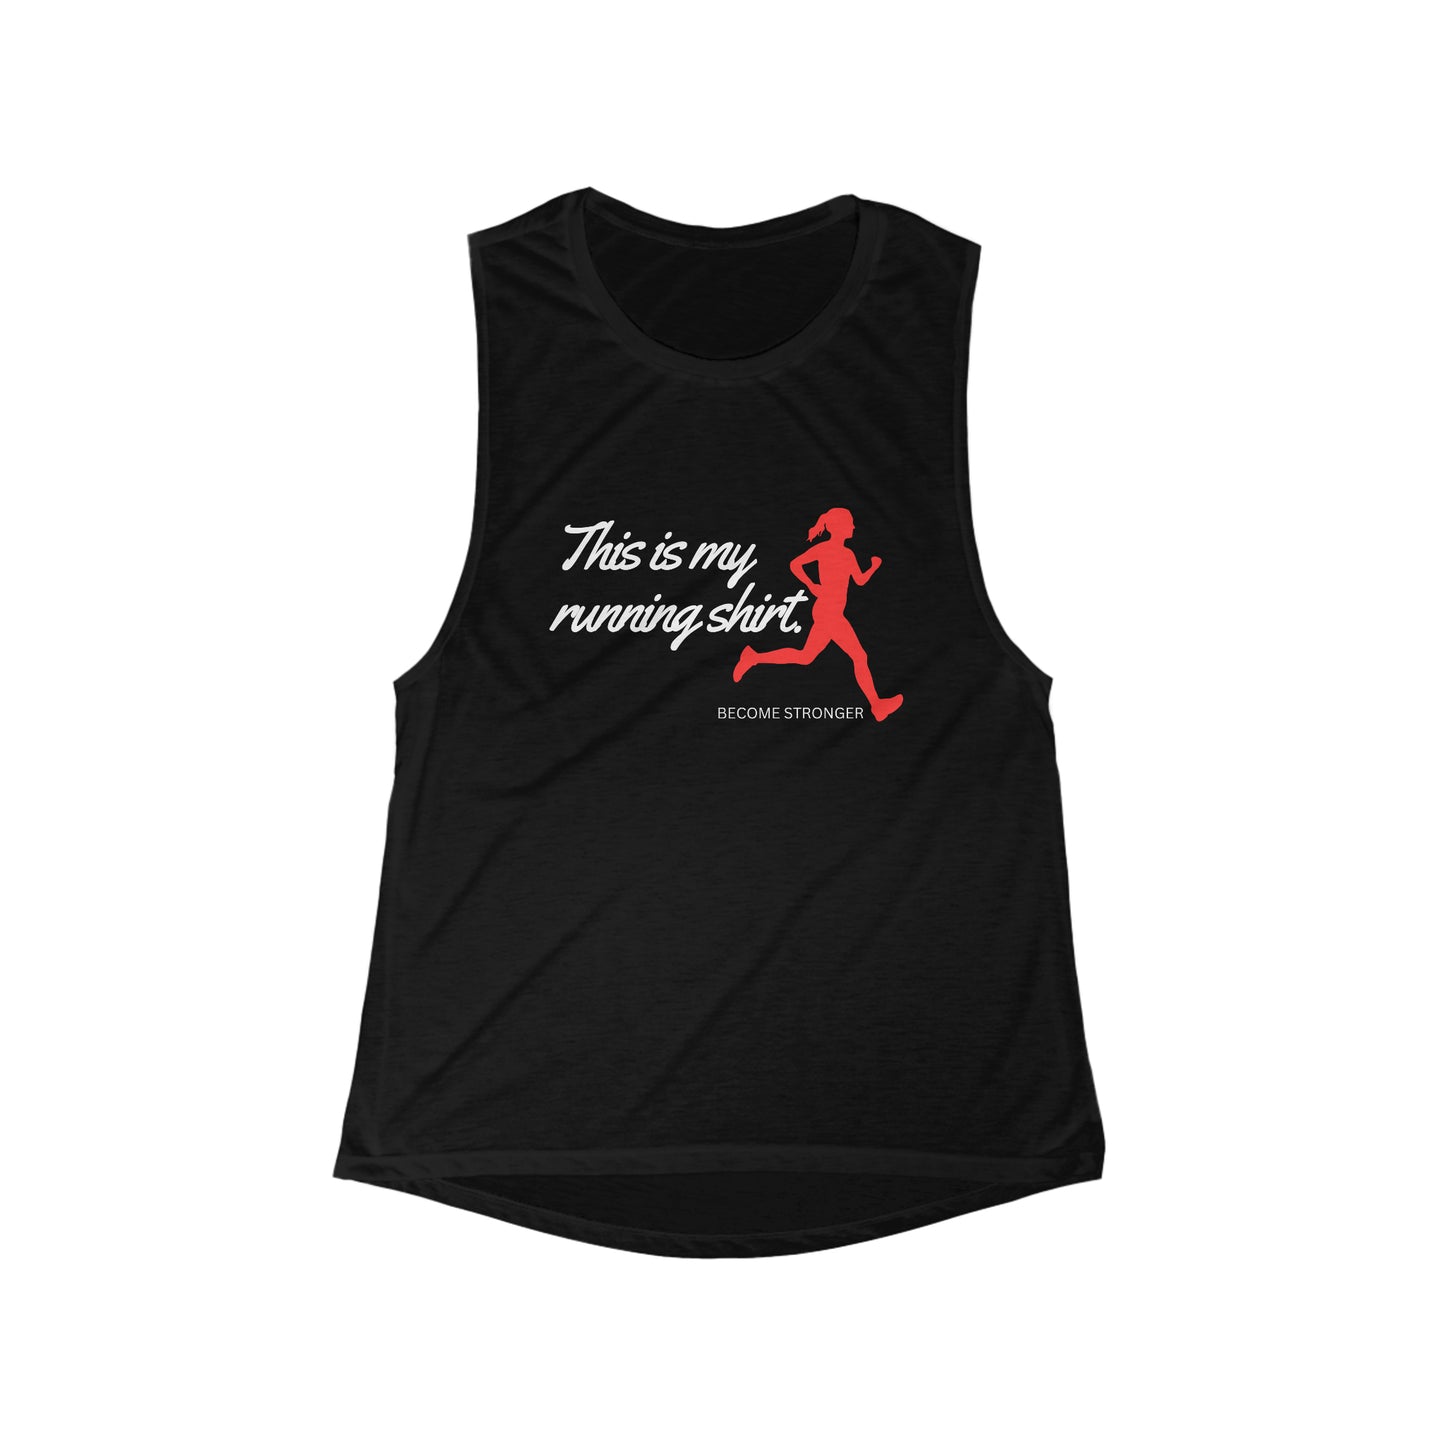 "This is my running shirt" Women's Muscle Tank